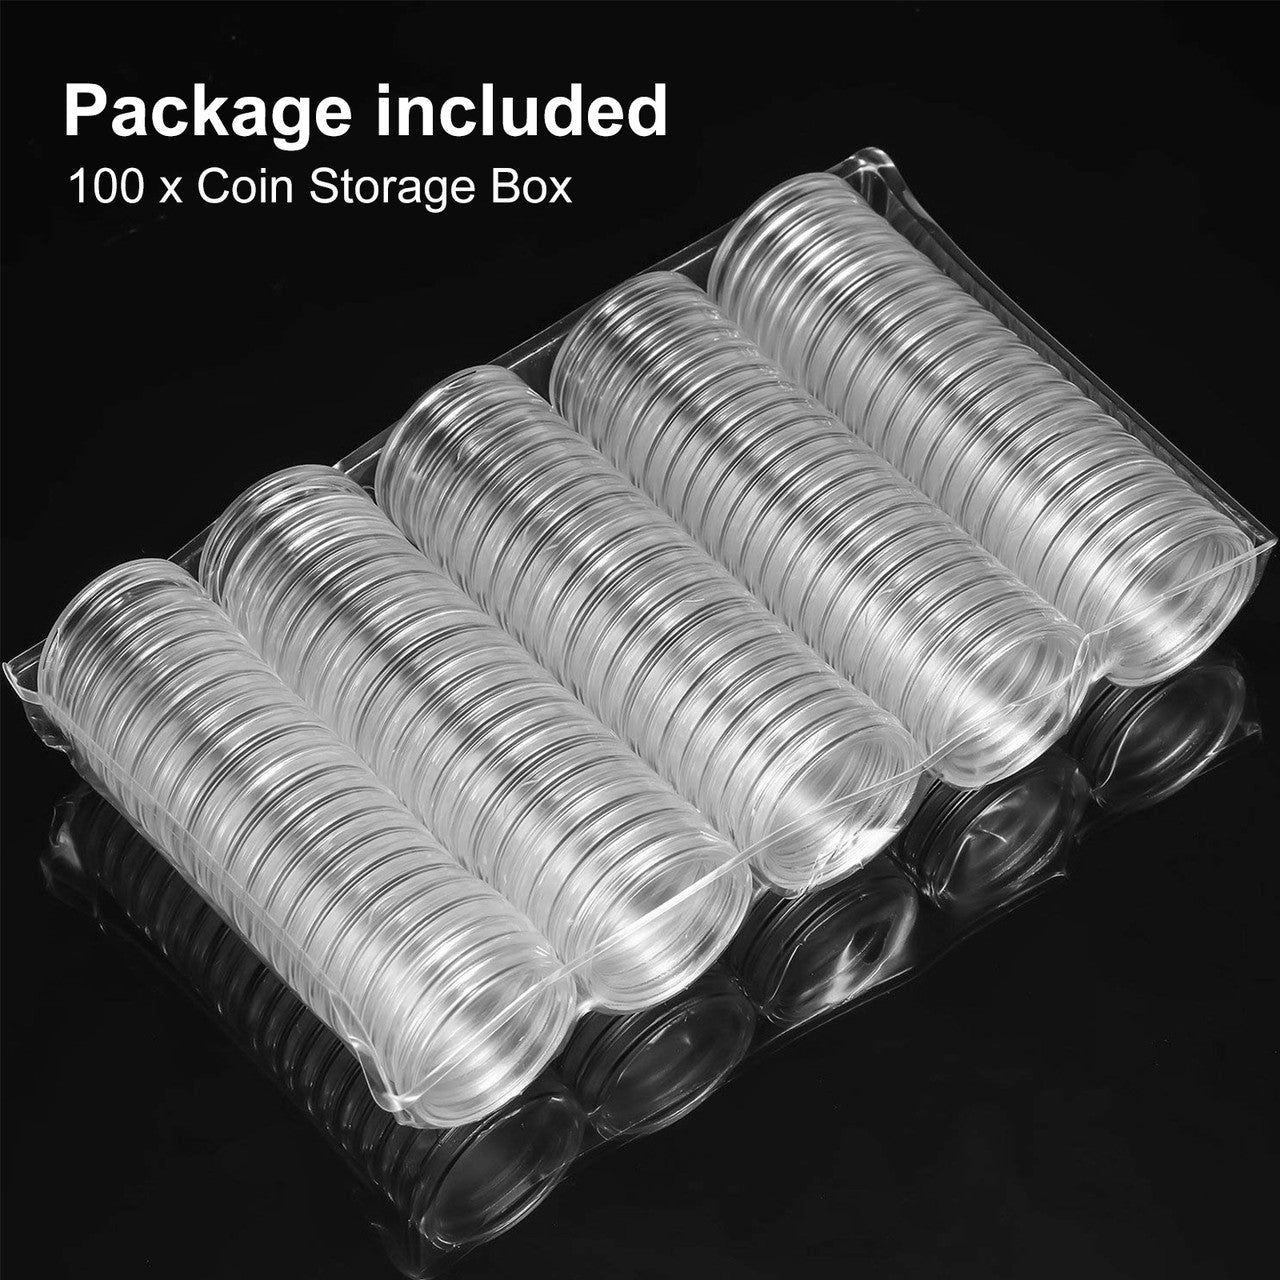 24mm Coin Capsules Protect Holder Case, Clear Plastic Coin Storage Organizer Box for Coin Collection Supplies Accessories, 100Pcs